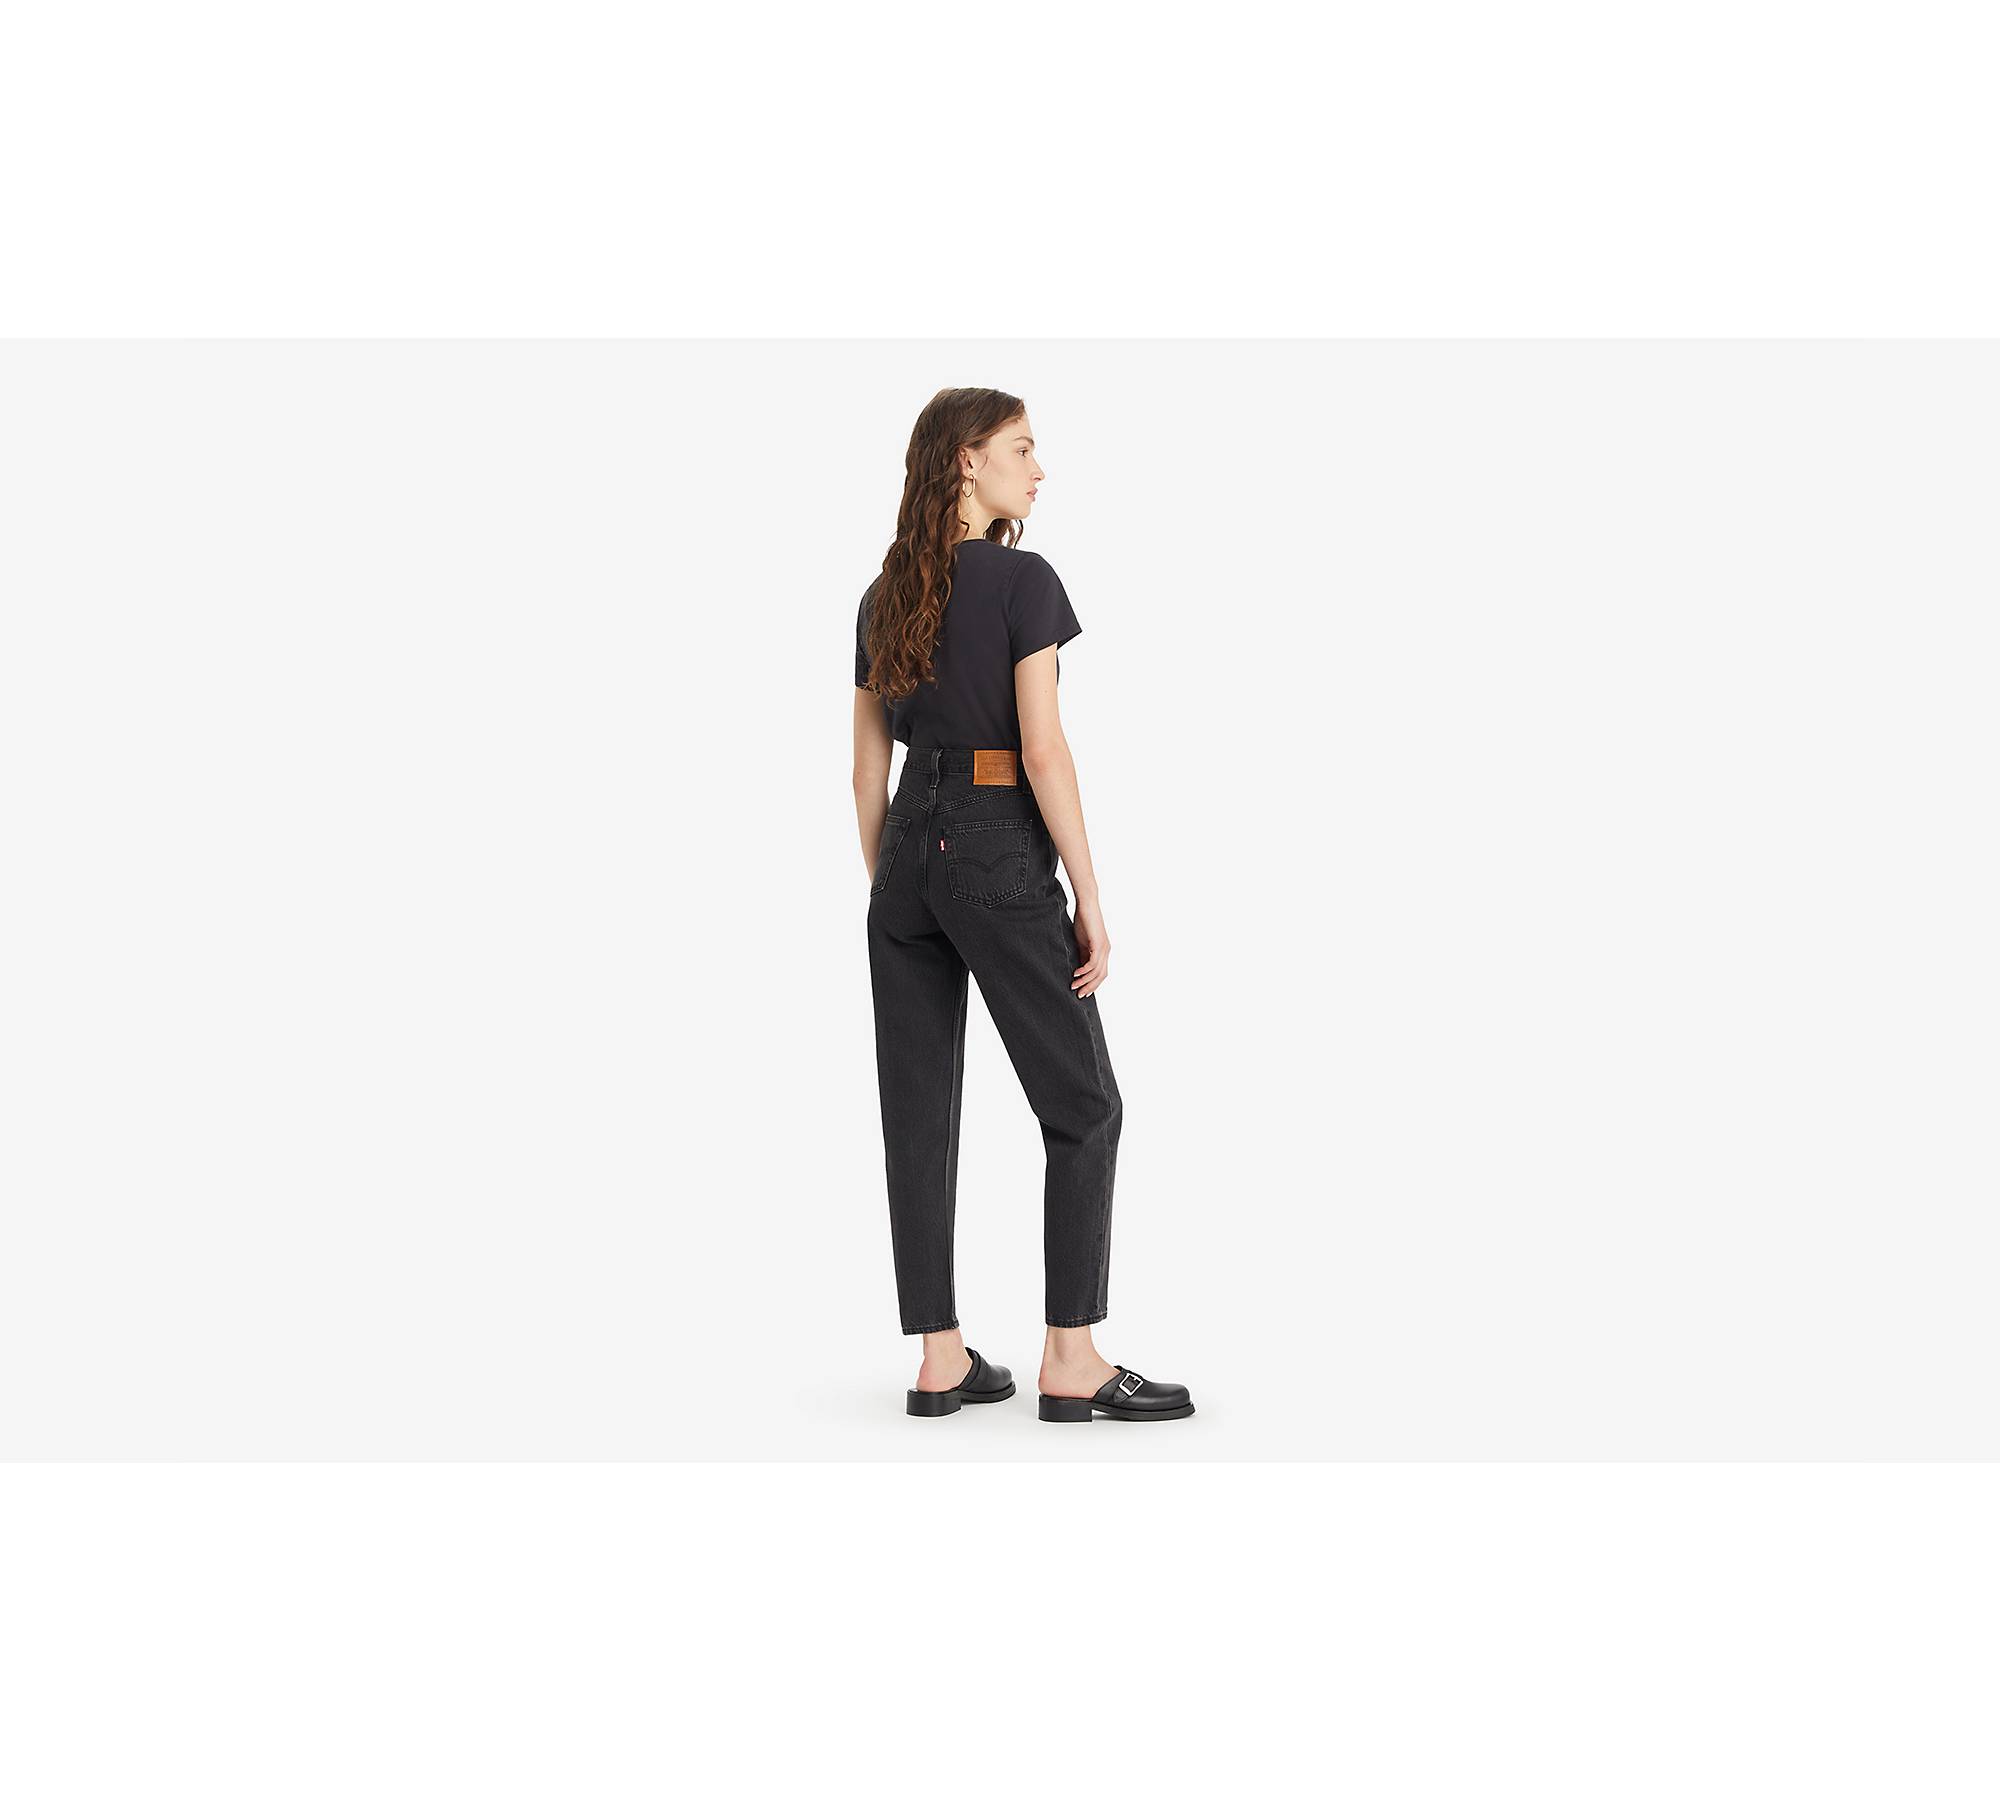 Levi's® HIGH WAISTED MOM - Jeans Tapered Fit - black denim